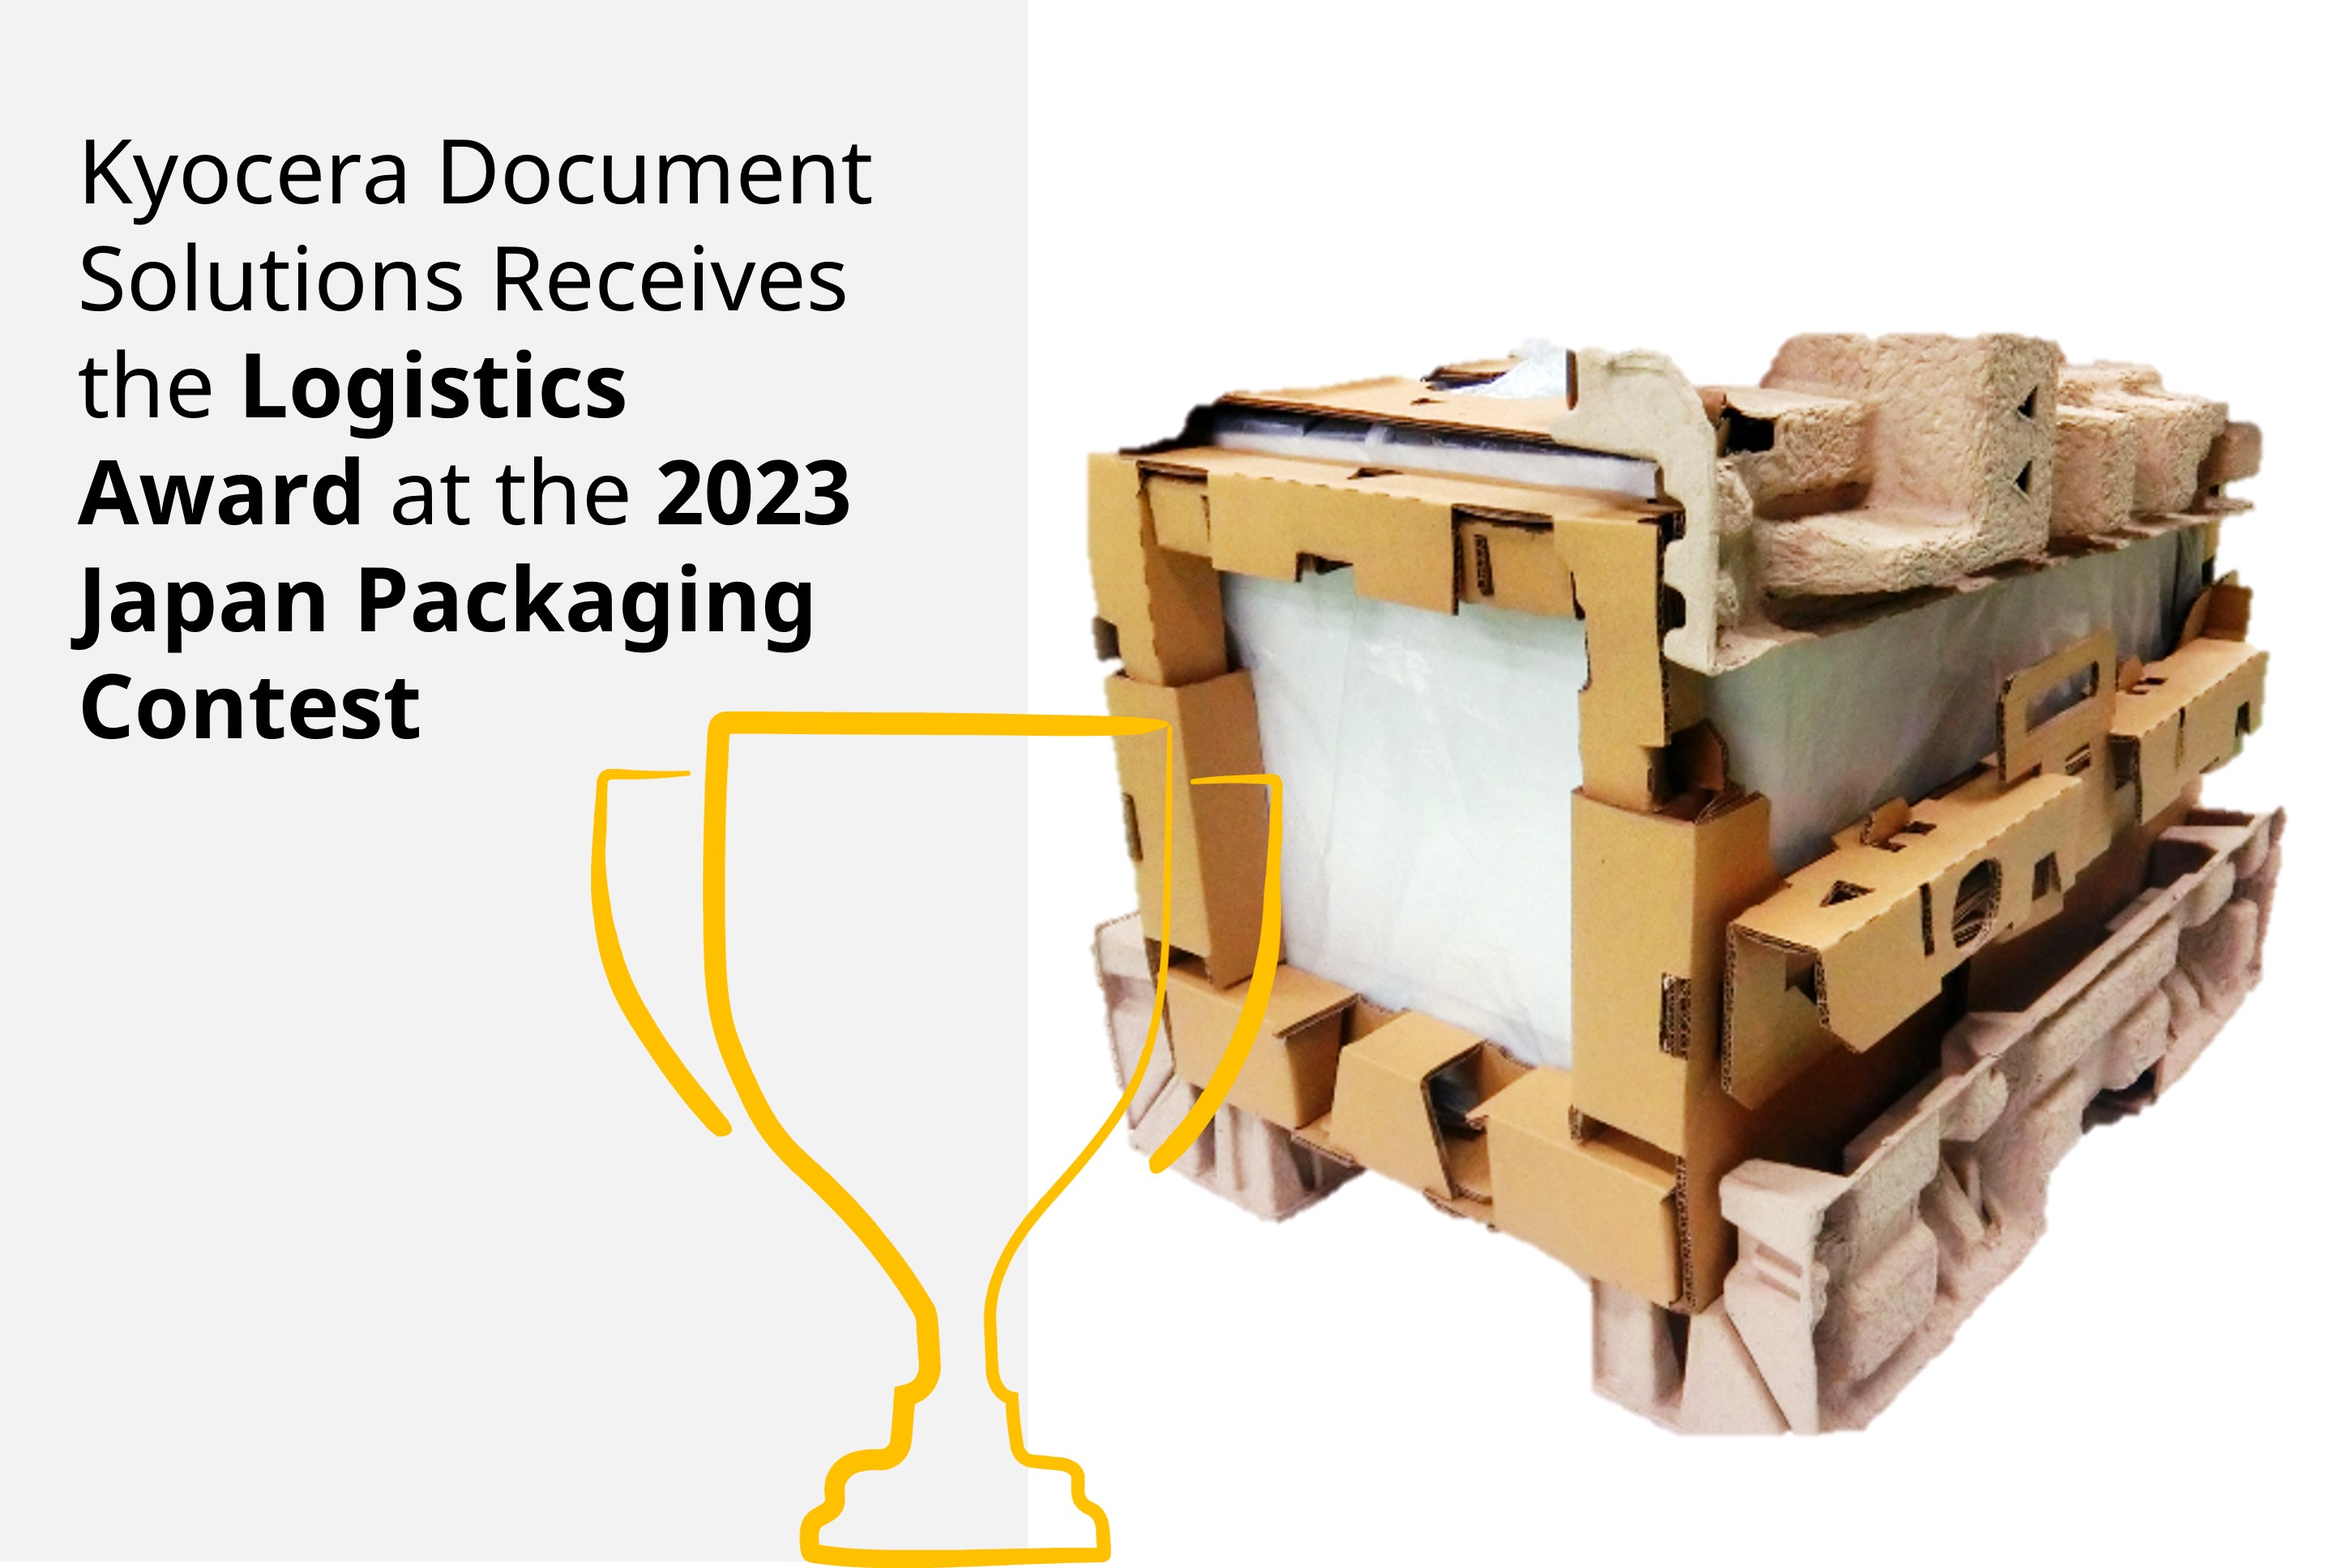 >Kyocera Document Solutions Receives the Logistics Award at the 2023 Japan Packaging Contest